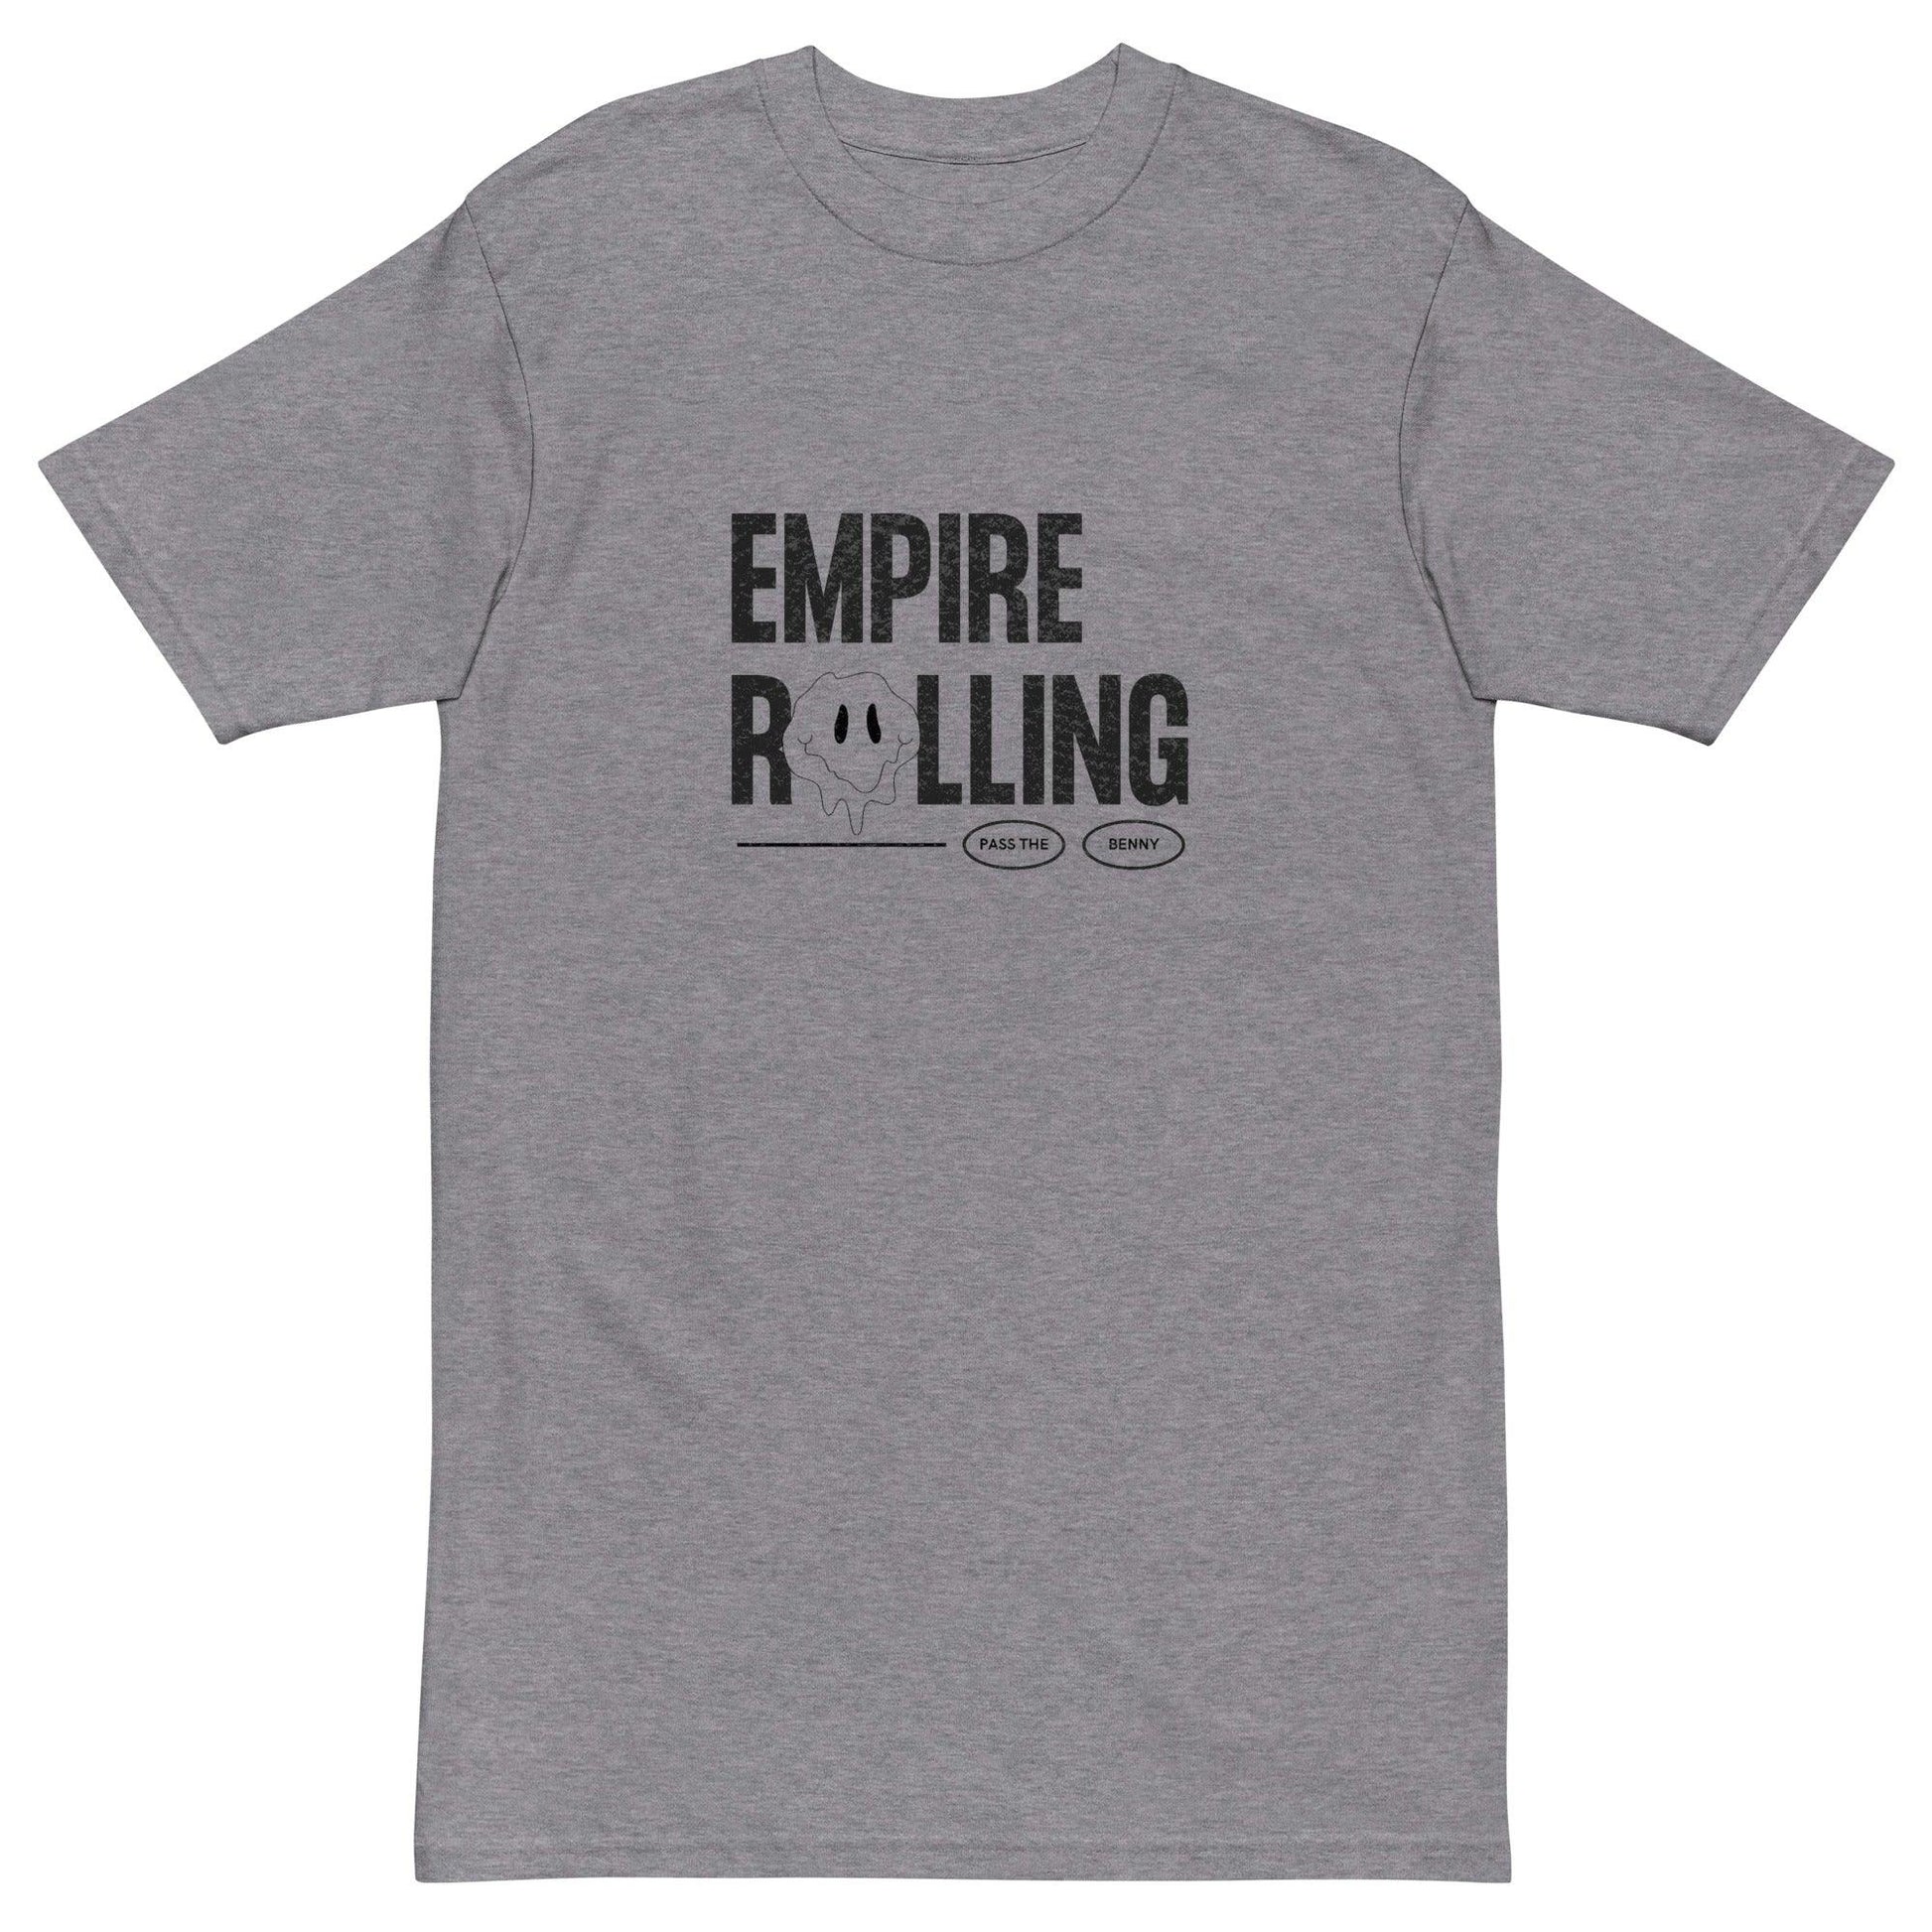 Empire Rolling's King Size Organic Hemp Rolling Papers, eco-friendly and crafted with high-quality, natural materials for a premium smoking experience.Melt Master Crew Tee - Empire Rolling Papers